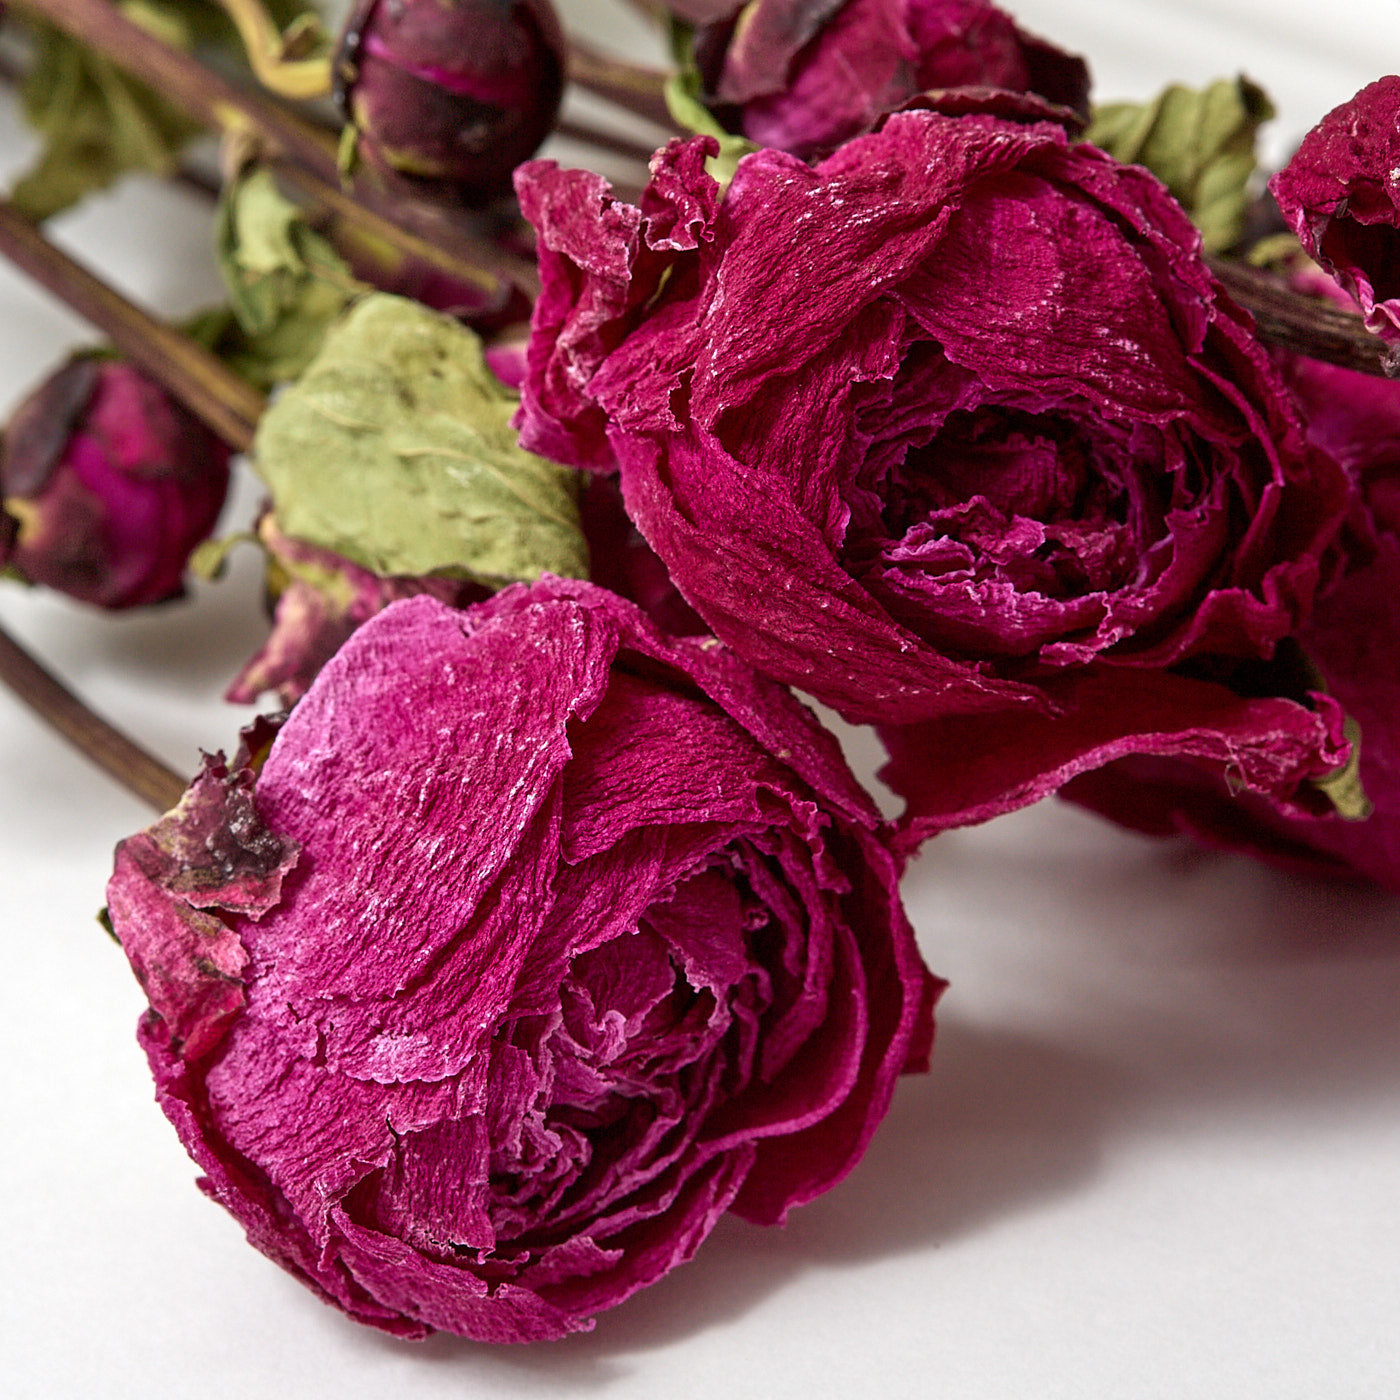 This is a bunch of Sarah Purple peony stems, The colour is a rich purple with magenta hues.